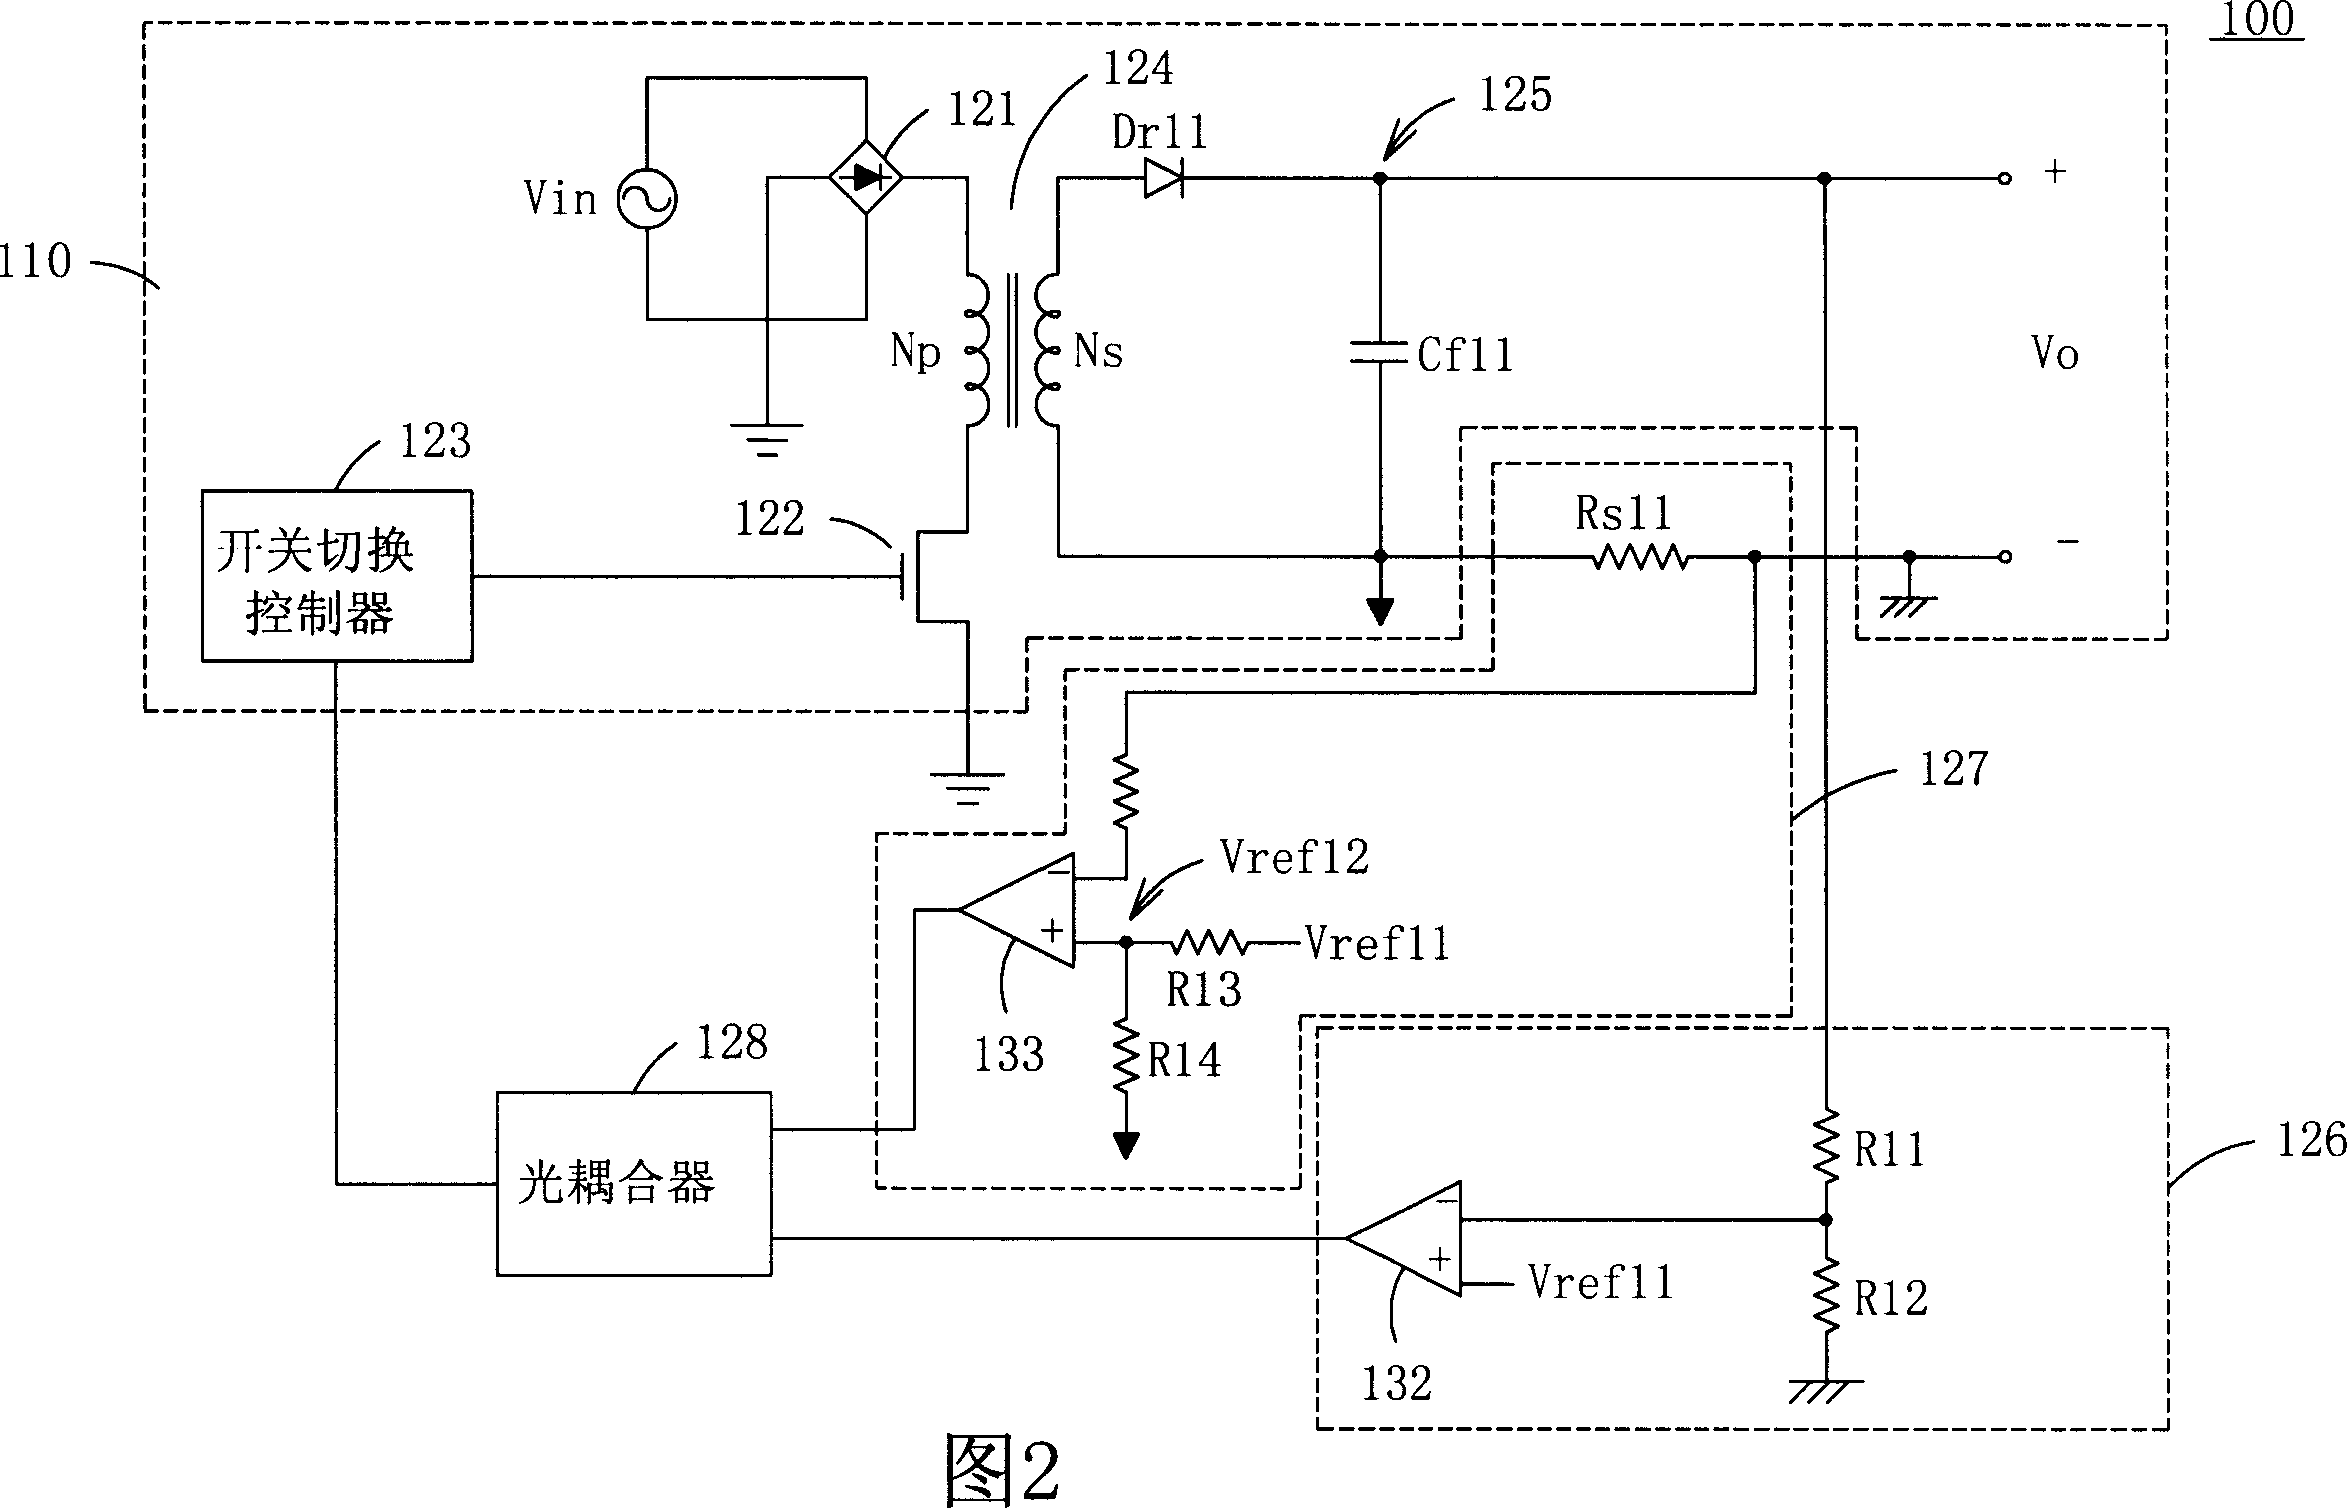 Power converter for providing output power limit and depending on load voltage adjustment